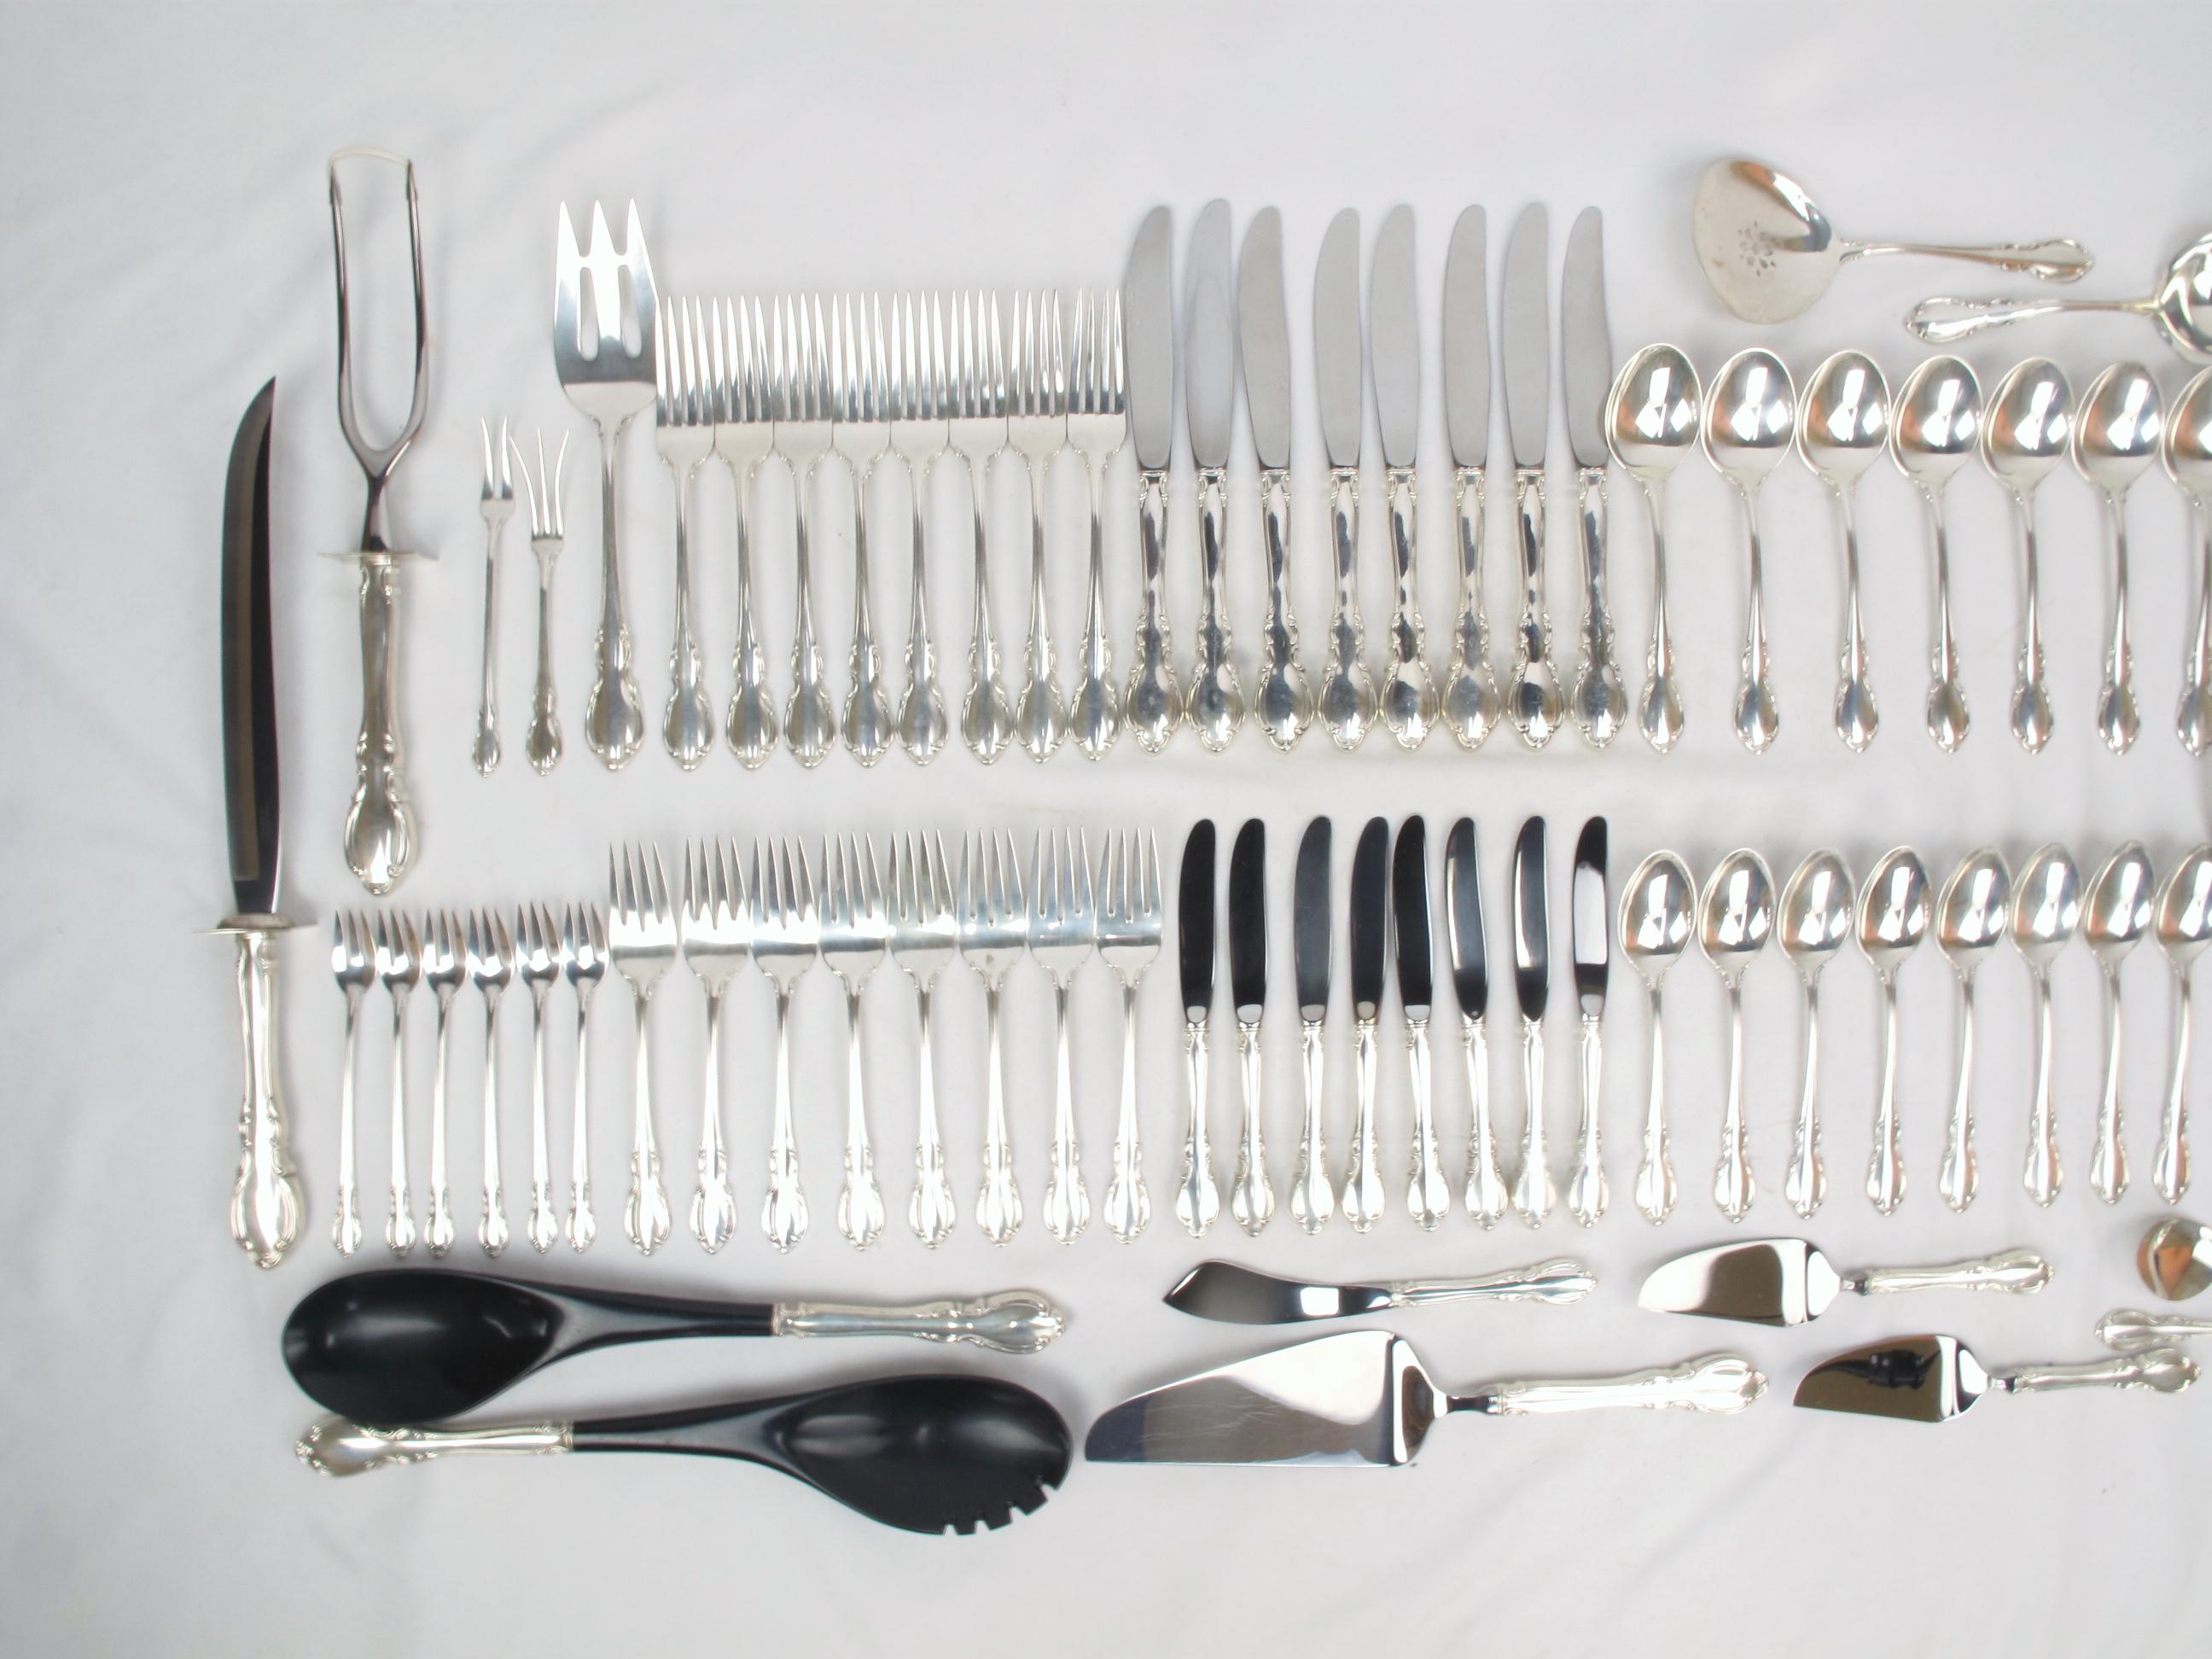 Towle Legato sterling flatware set. Introduced in 1962, the Legato pattern features traditional curves and contours restrained by a modern touch, emphasizing the graceful handle of this pattern. Refined and sophisticated yet rich.

75 pieces.